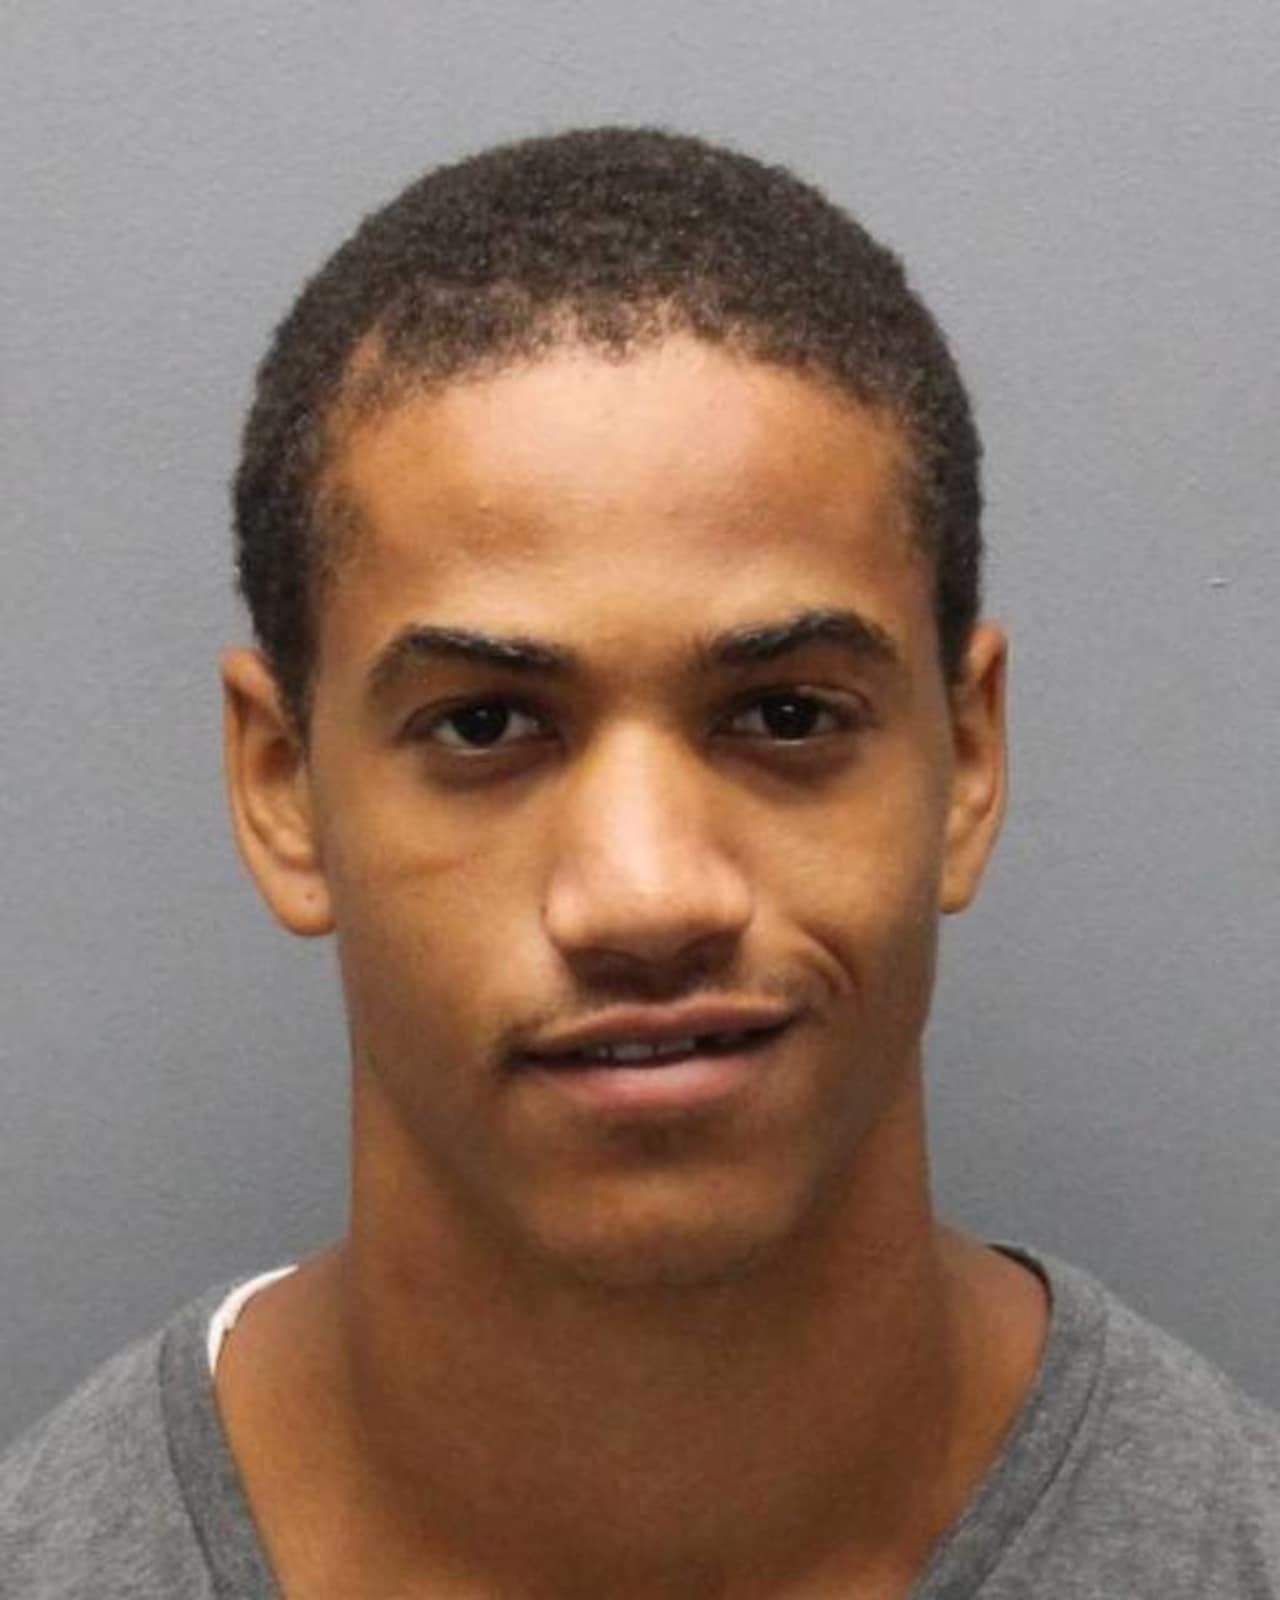 Yonkers resident Floyd Bruce, 19, has been sentenced for his role in shooting a 4-year-old girl.